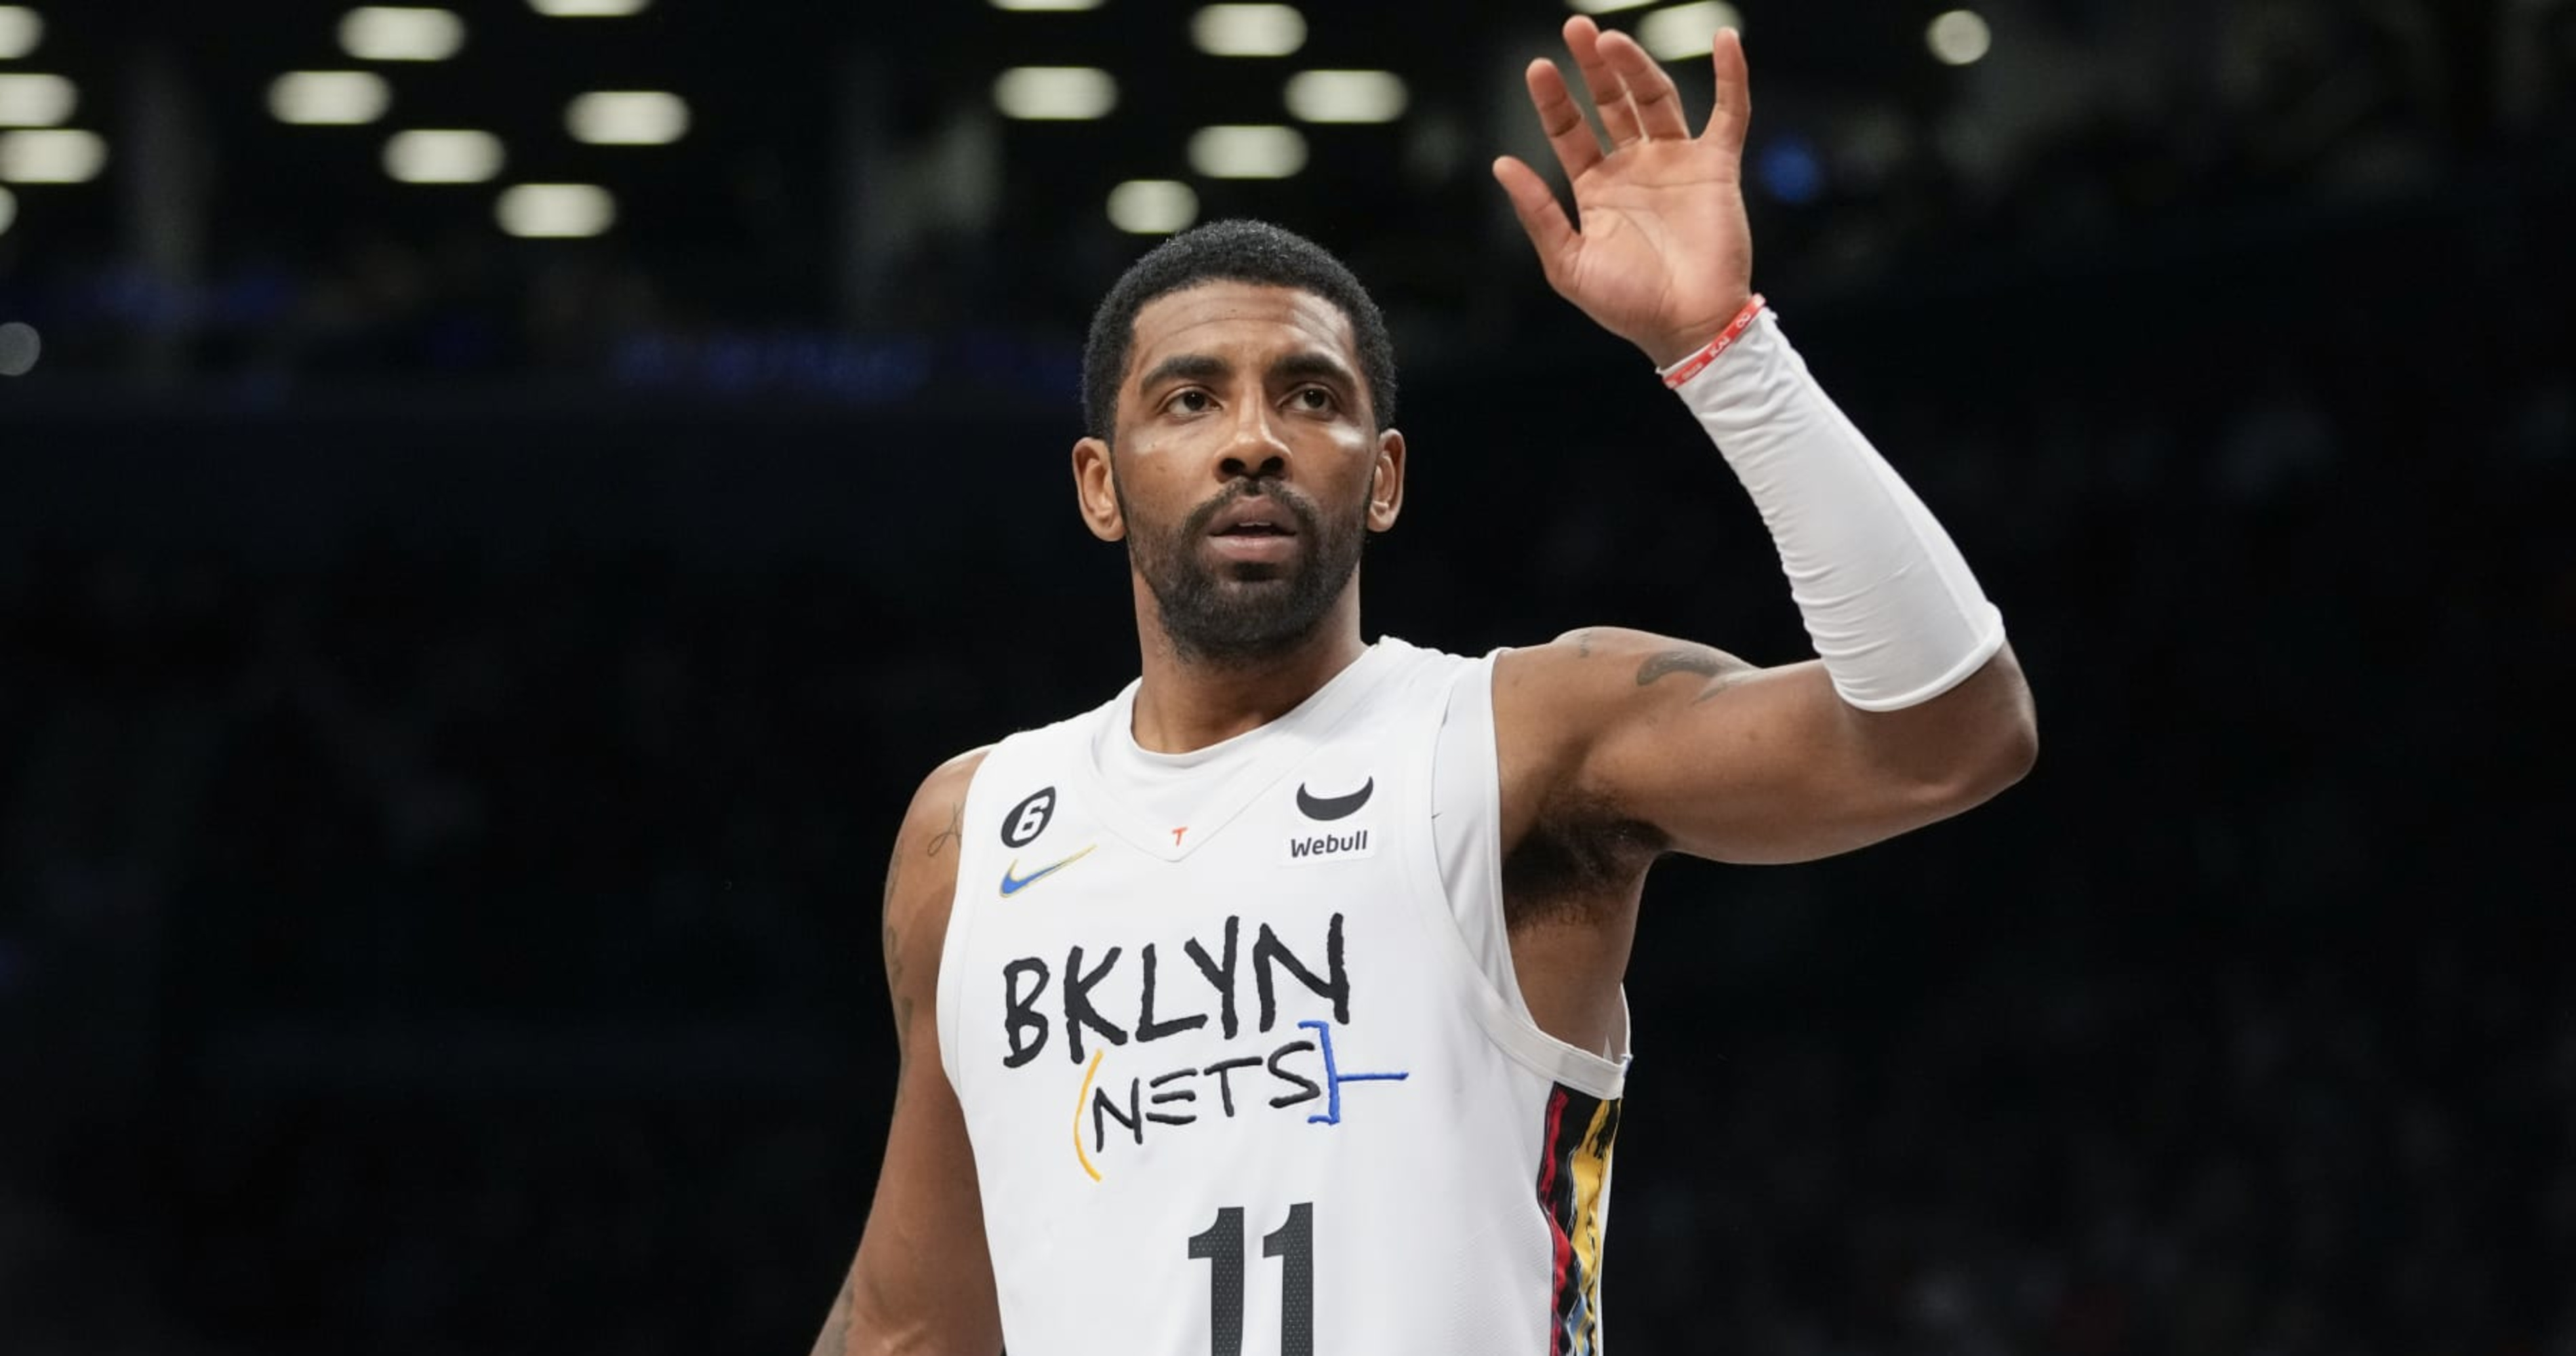 Kyrie Irving's contract: Why the Nets may not offer him the max